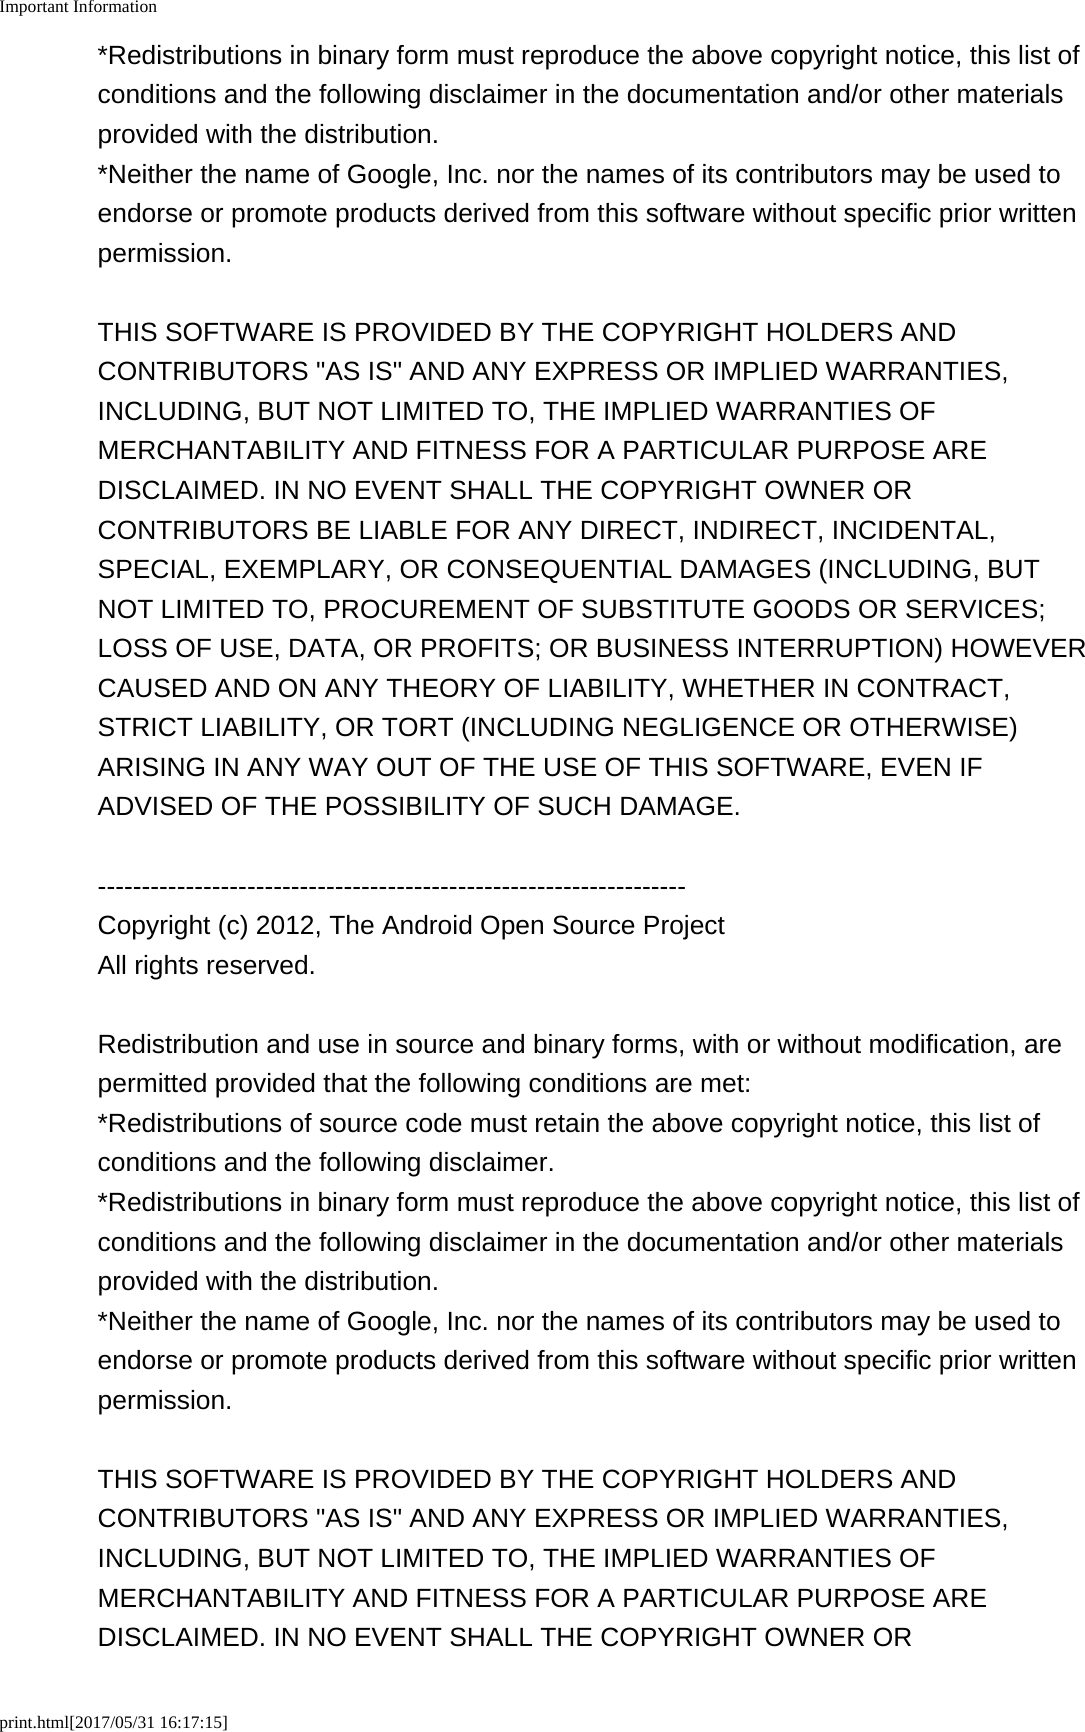 Important Informationprint.html[2017/05/31 16:17:15]*Redistributions in binary form must reproduce the above copyright notice, this list ofconditions and the following disclaimer in the documentation and/or other materialsprovided with the distribution.*Neither the name of Google, Inc. nor the names of its contributors may be used toendorse or promote products derived from this software without specific prior writtenpermission.THIS SOFTWARE IS PROVIDED BY THE COPYRIGHT HOLDERS ANDCONTRIBUTORS &quot;AS IS&quot; AND ANY EXPRESS OR IMPLIED WARRANTIES,INCLUDING, BUT NOT LIMITED TO, THE IMPLIED WARRANTIES OFMERCHANTABILITY AND FITNESS FOR A PARTICULAR PURPOSE AREDISCLAIMED. IN NO EVENT SHALL THE COPYRIGHT OWNER ORCONTRIBUTORS BE LIABLE FOR ANY DIRECT, INDIRECT, INCIDENTAL,SPECIAL, EXEMPLARY, OR CONSEQUENTIAL DAMAGES (INCLUDING, BUTNOT LIMITED TO, PROCUREMENT OF SUBSTITUTE GOODS OR SERVICES;LOSS OF USE, DATA, OR PROFITS; OR BUSINESS INTERRUPTION) HOWEVERCAUSED AND ON ANY THEORY OF LIABILITY, WHETHER IN CONTRACT,STRICT LIABILITY, OR TORT (INCLUDING NEGLIGENCE OR OTHERWISE)ARISING IN ANY WAY OUT OF THE USE OF THIS SOFTWARE, EVEN IFADVISED OF THE POSSIBILITY OF SUCH DAMAGE.-------------------------------------------------------------------Copyright (c) 2012, The Android Open Source ProjectAll rights reserved.Redistribution and use in source and binary forms, with or without modification, arepermitted provided that the following conditions are met:*Redistributions of source code must retain the above copyright notice, this list ofconditions and the following disclaimer.*Redistributions in binary form must reproduce the above copyright notice, this list ofconditions and the following disclaimer in the documentation and/or other materialsprovided with the distribution.*Neither the name of Google, Inc. nor the names of its contributors may be used toendorse or promote products derived from this software without specific prior writtenpermission.THIS SOFTWARE IS PROVIDED BY THE COPYRIGHT HOLDERS ANDCONTRIBUTORS &quot;AS IS&quot; AND ANY EXPRESS OR IMPLIED WARRANTIES,INCLUDING, BUT NOT LIMITED TO, THE IMPLIED WARRANTIES OFMERCHANTABILITY AND FITNESS FOR A PARTICULAR PURPOSE AREDISCLAIMED. IN NO EVENT SHALL THE COPYRIGHT OWNER OR